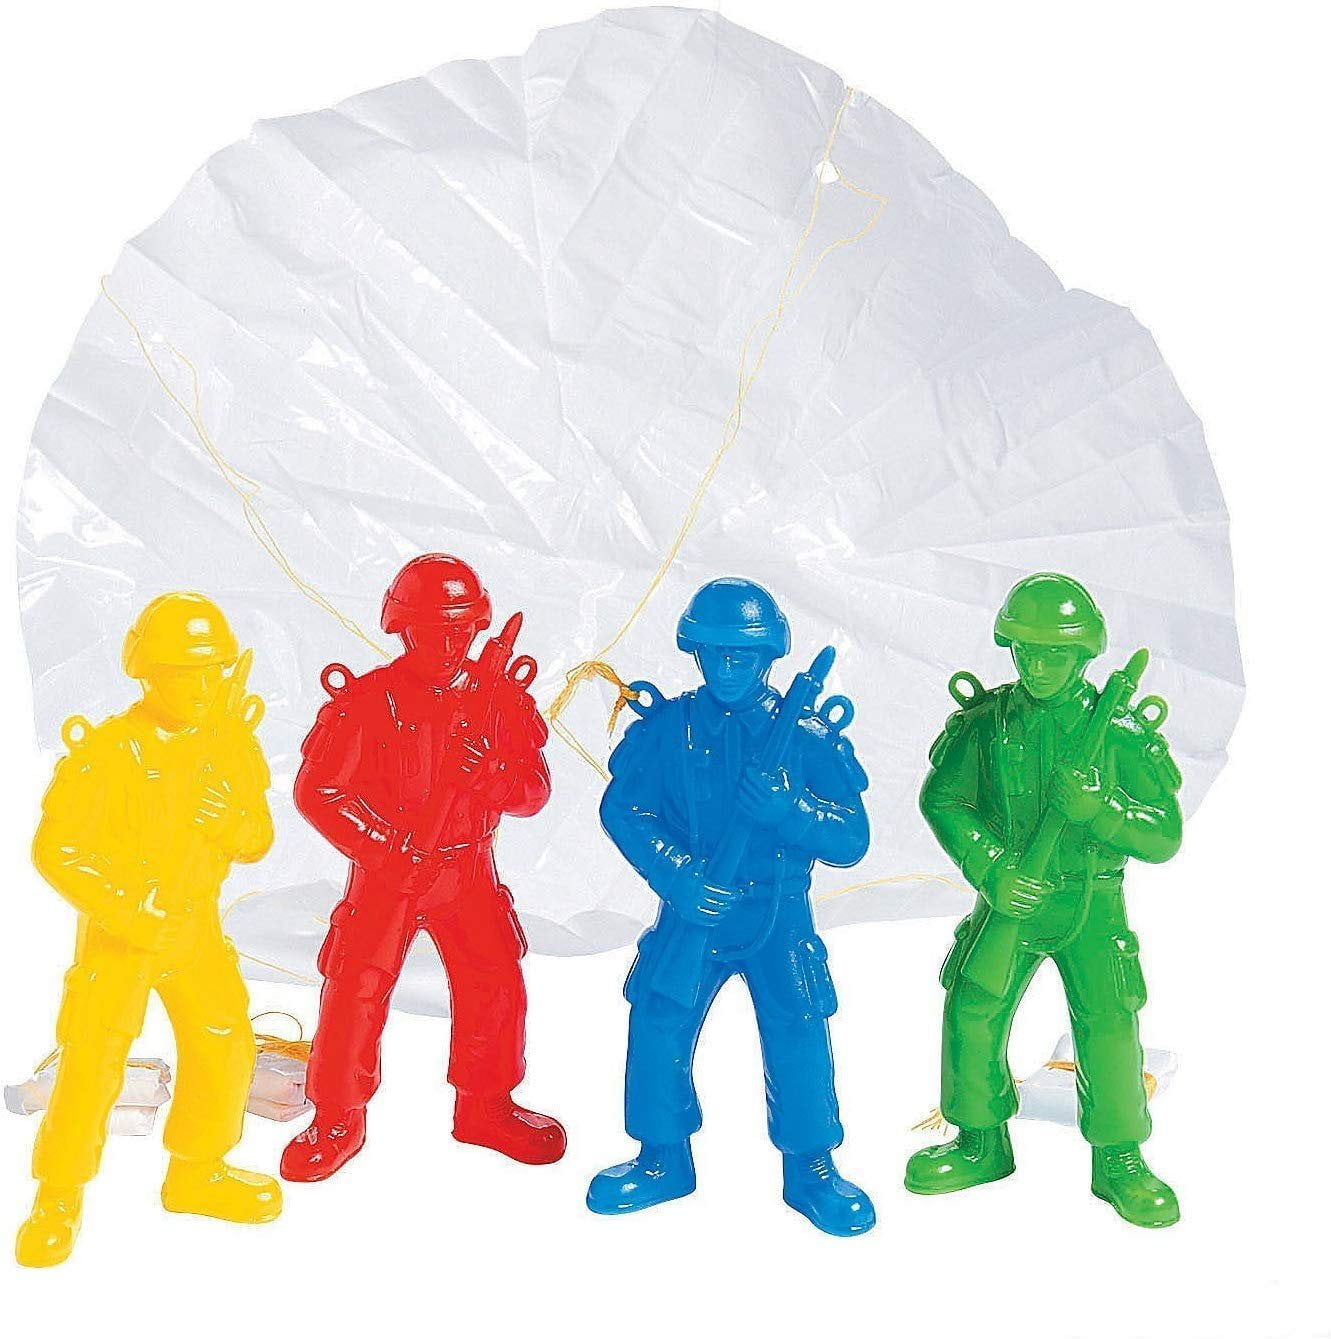 PARACHUTING ARMY MEN TOY SOLDIERS BOYS FAVOR PRIZES BIRTHDAY PARTY BAG FILLERS 